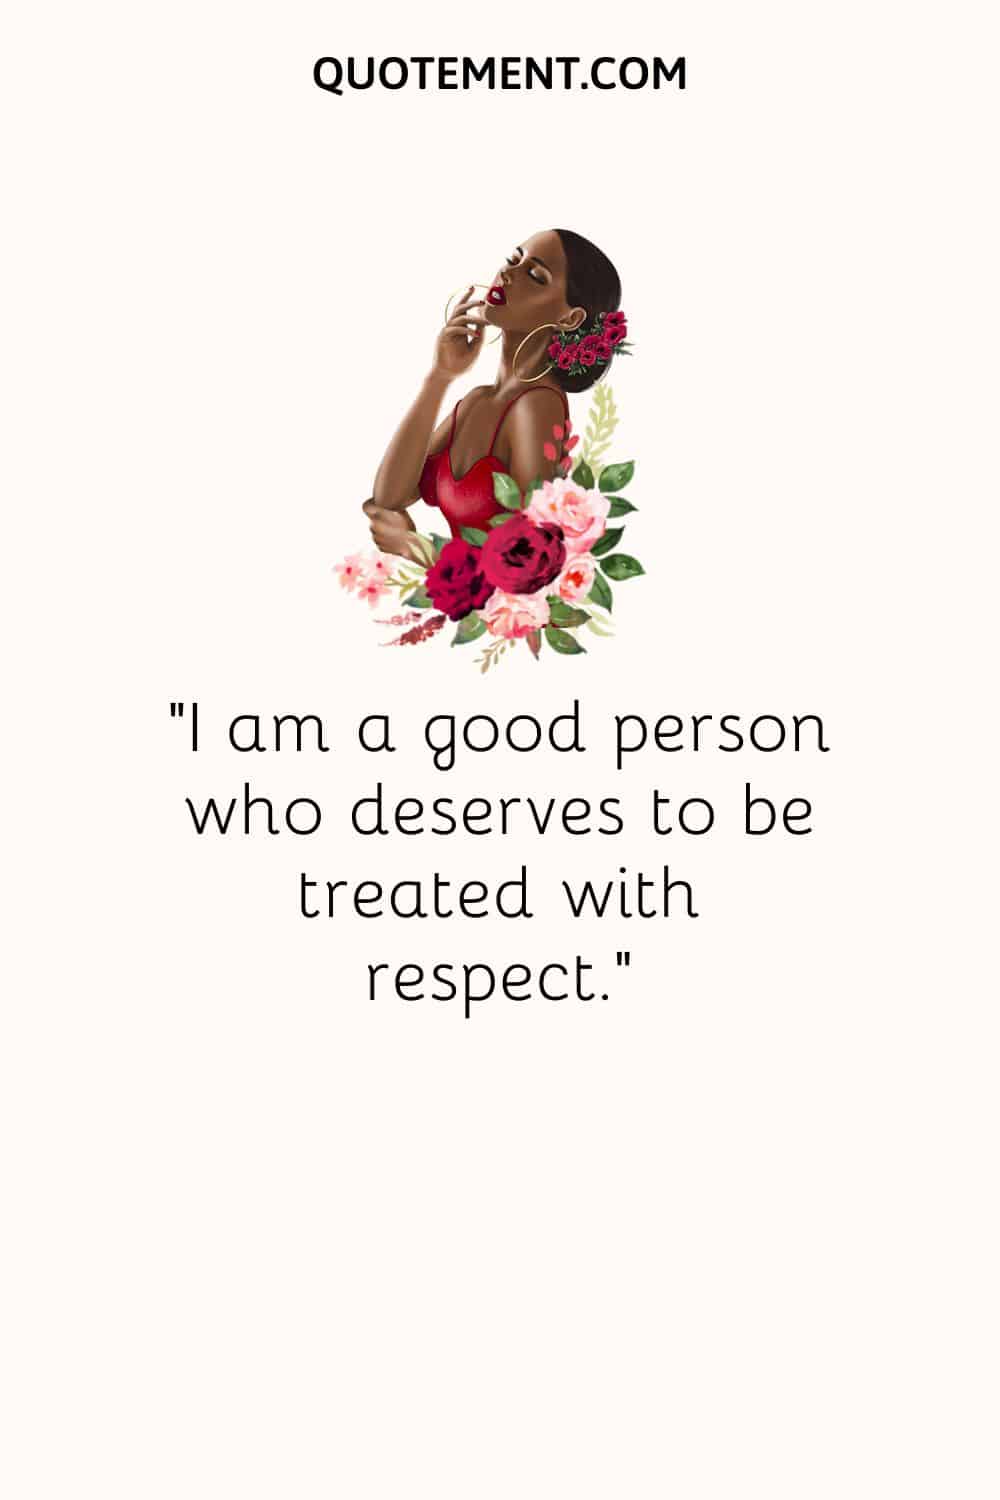 “I am a good person who deserves to be treated with respect.“